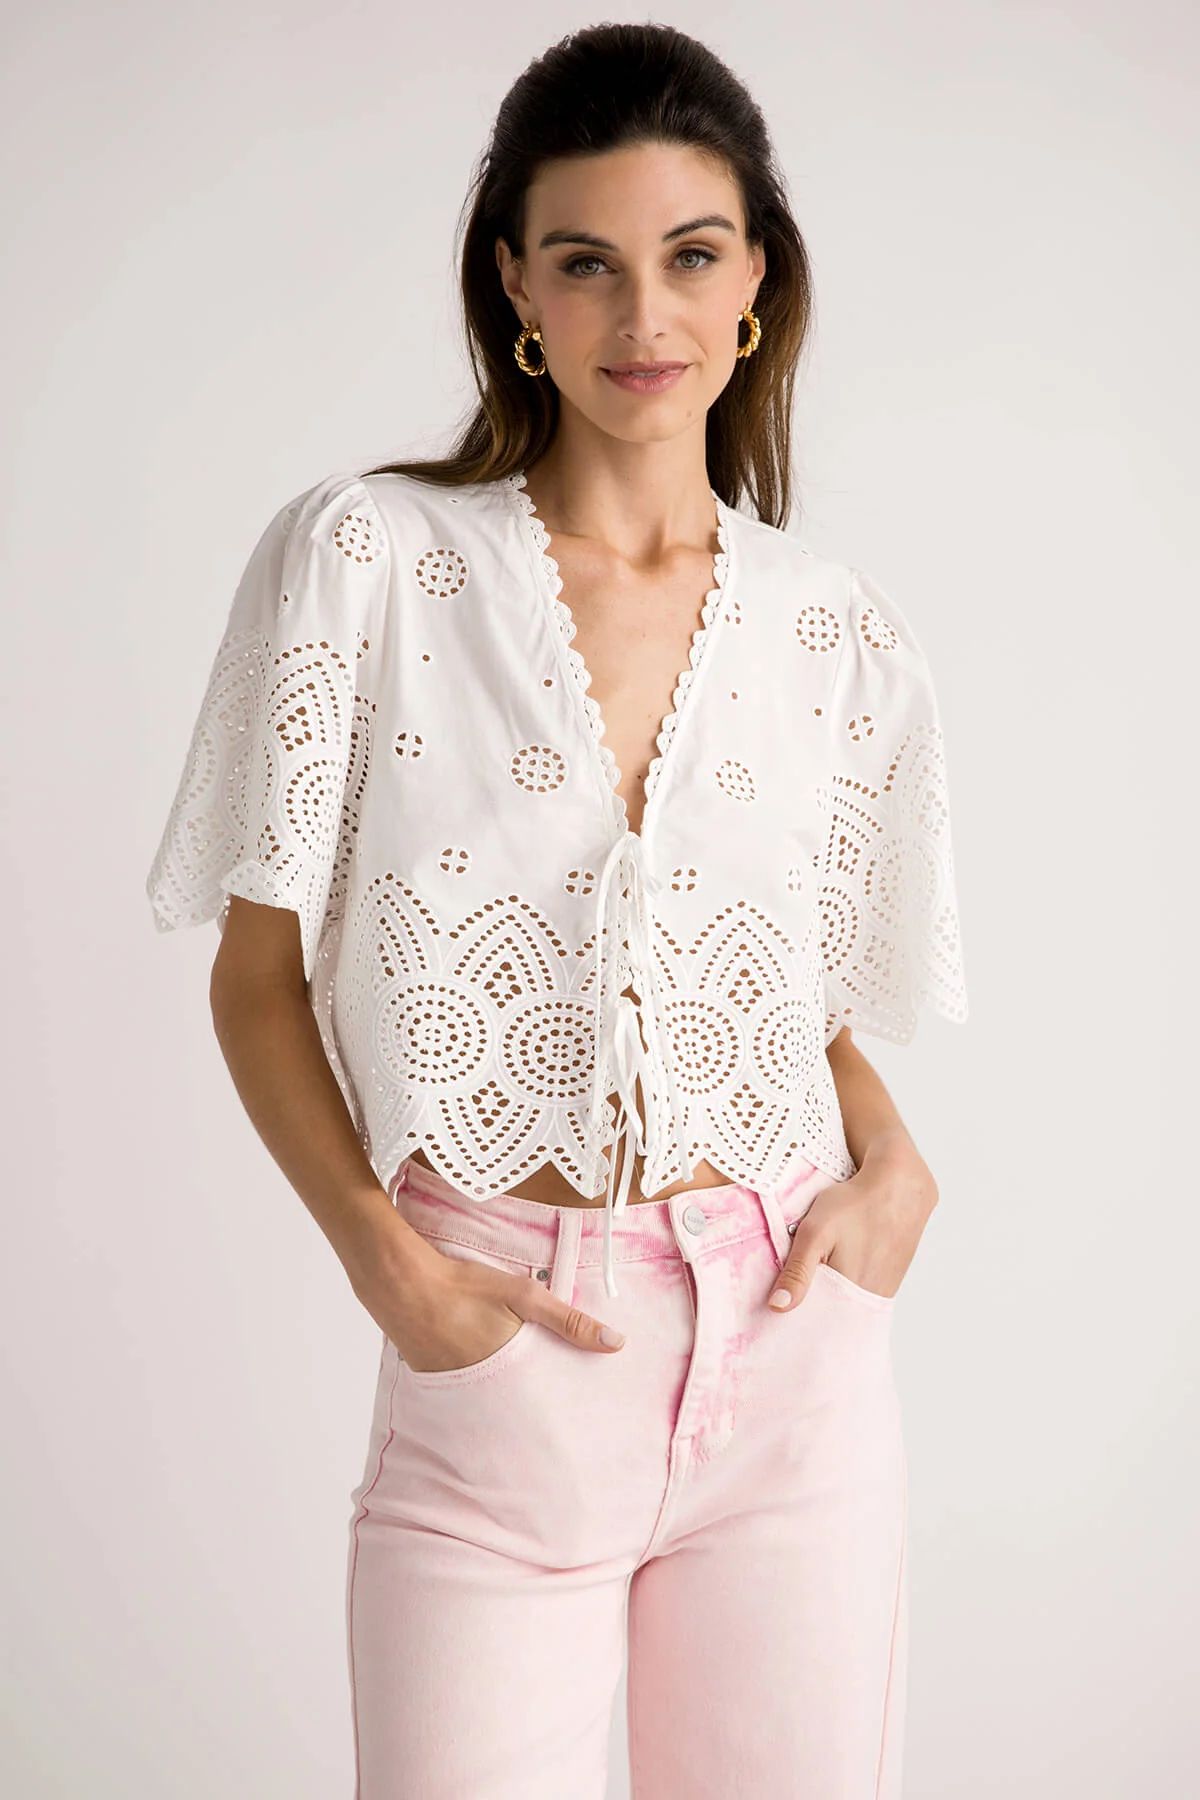 Lucy Paris Loray Eyelet Top | Social Threads